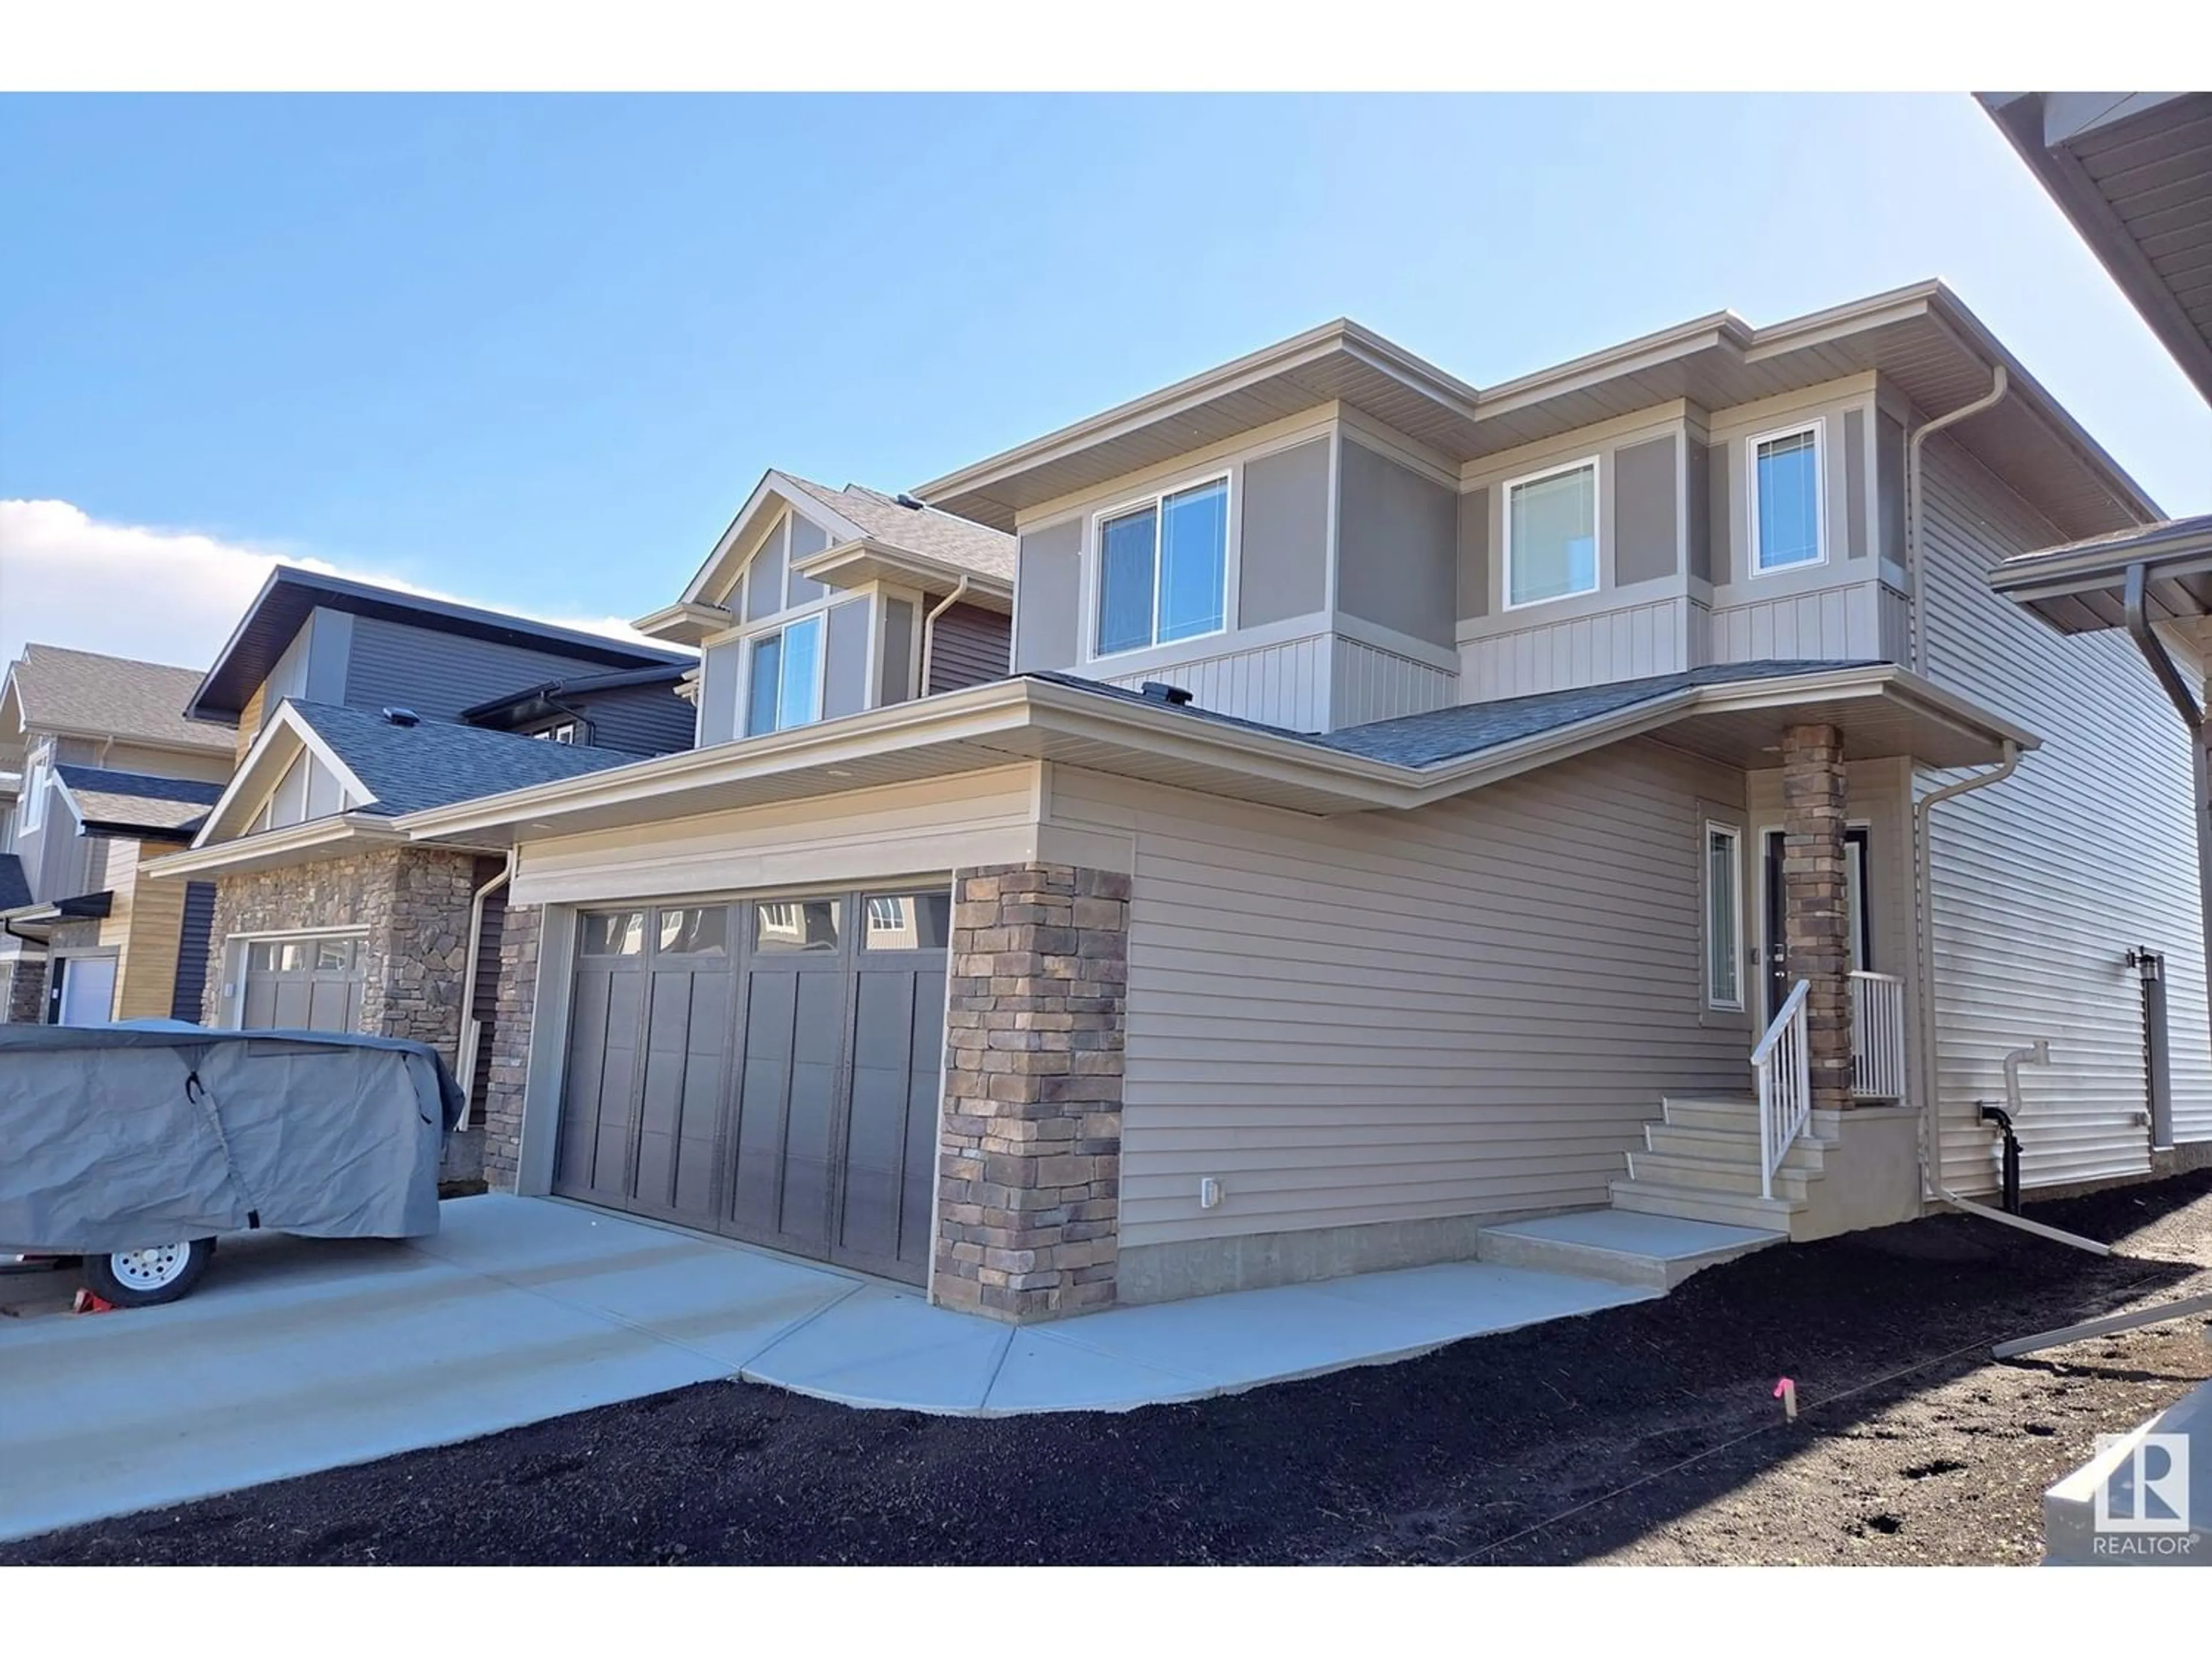 A pic from exterior of the house or condo for 2532 208 ST NW NW, Edmonton Alberta T6M1P4